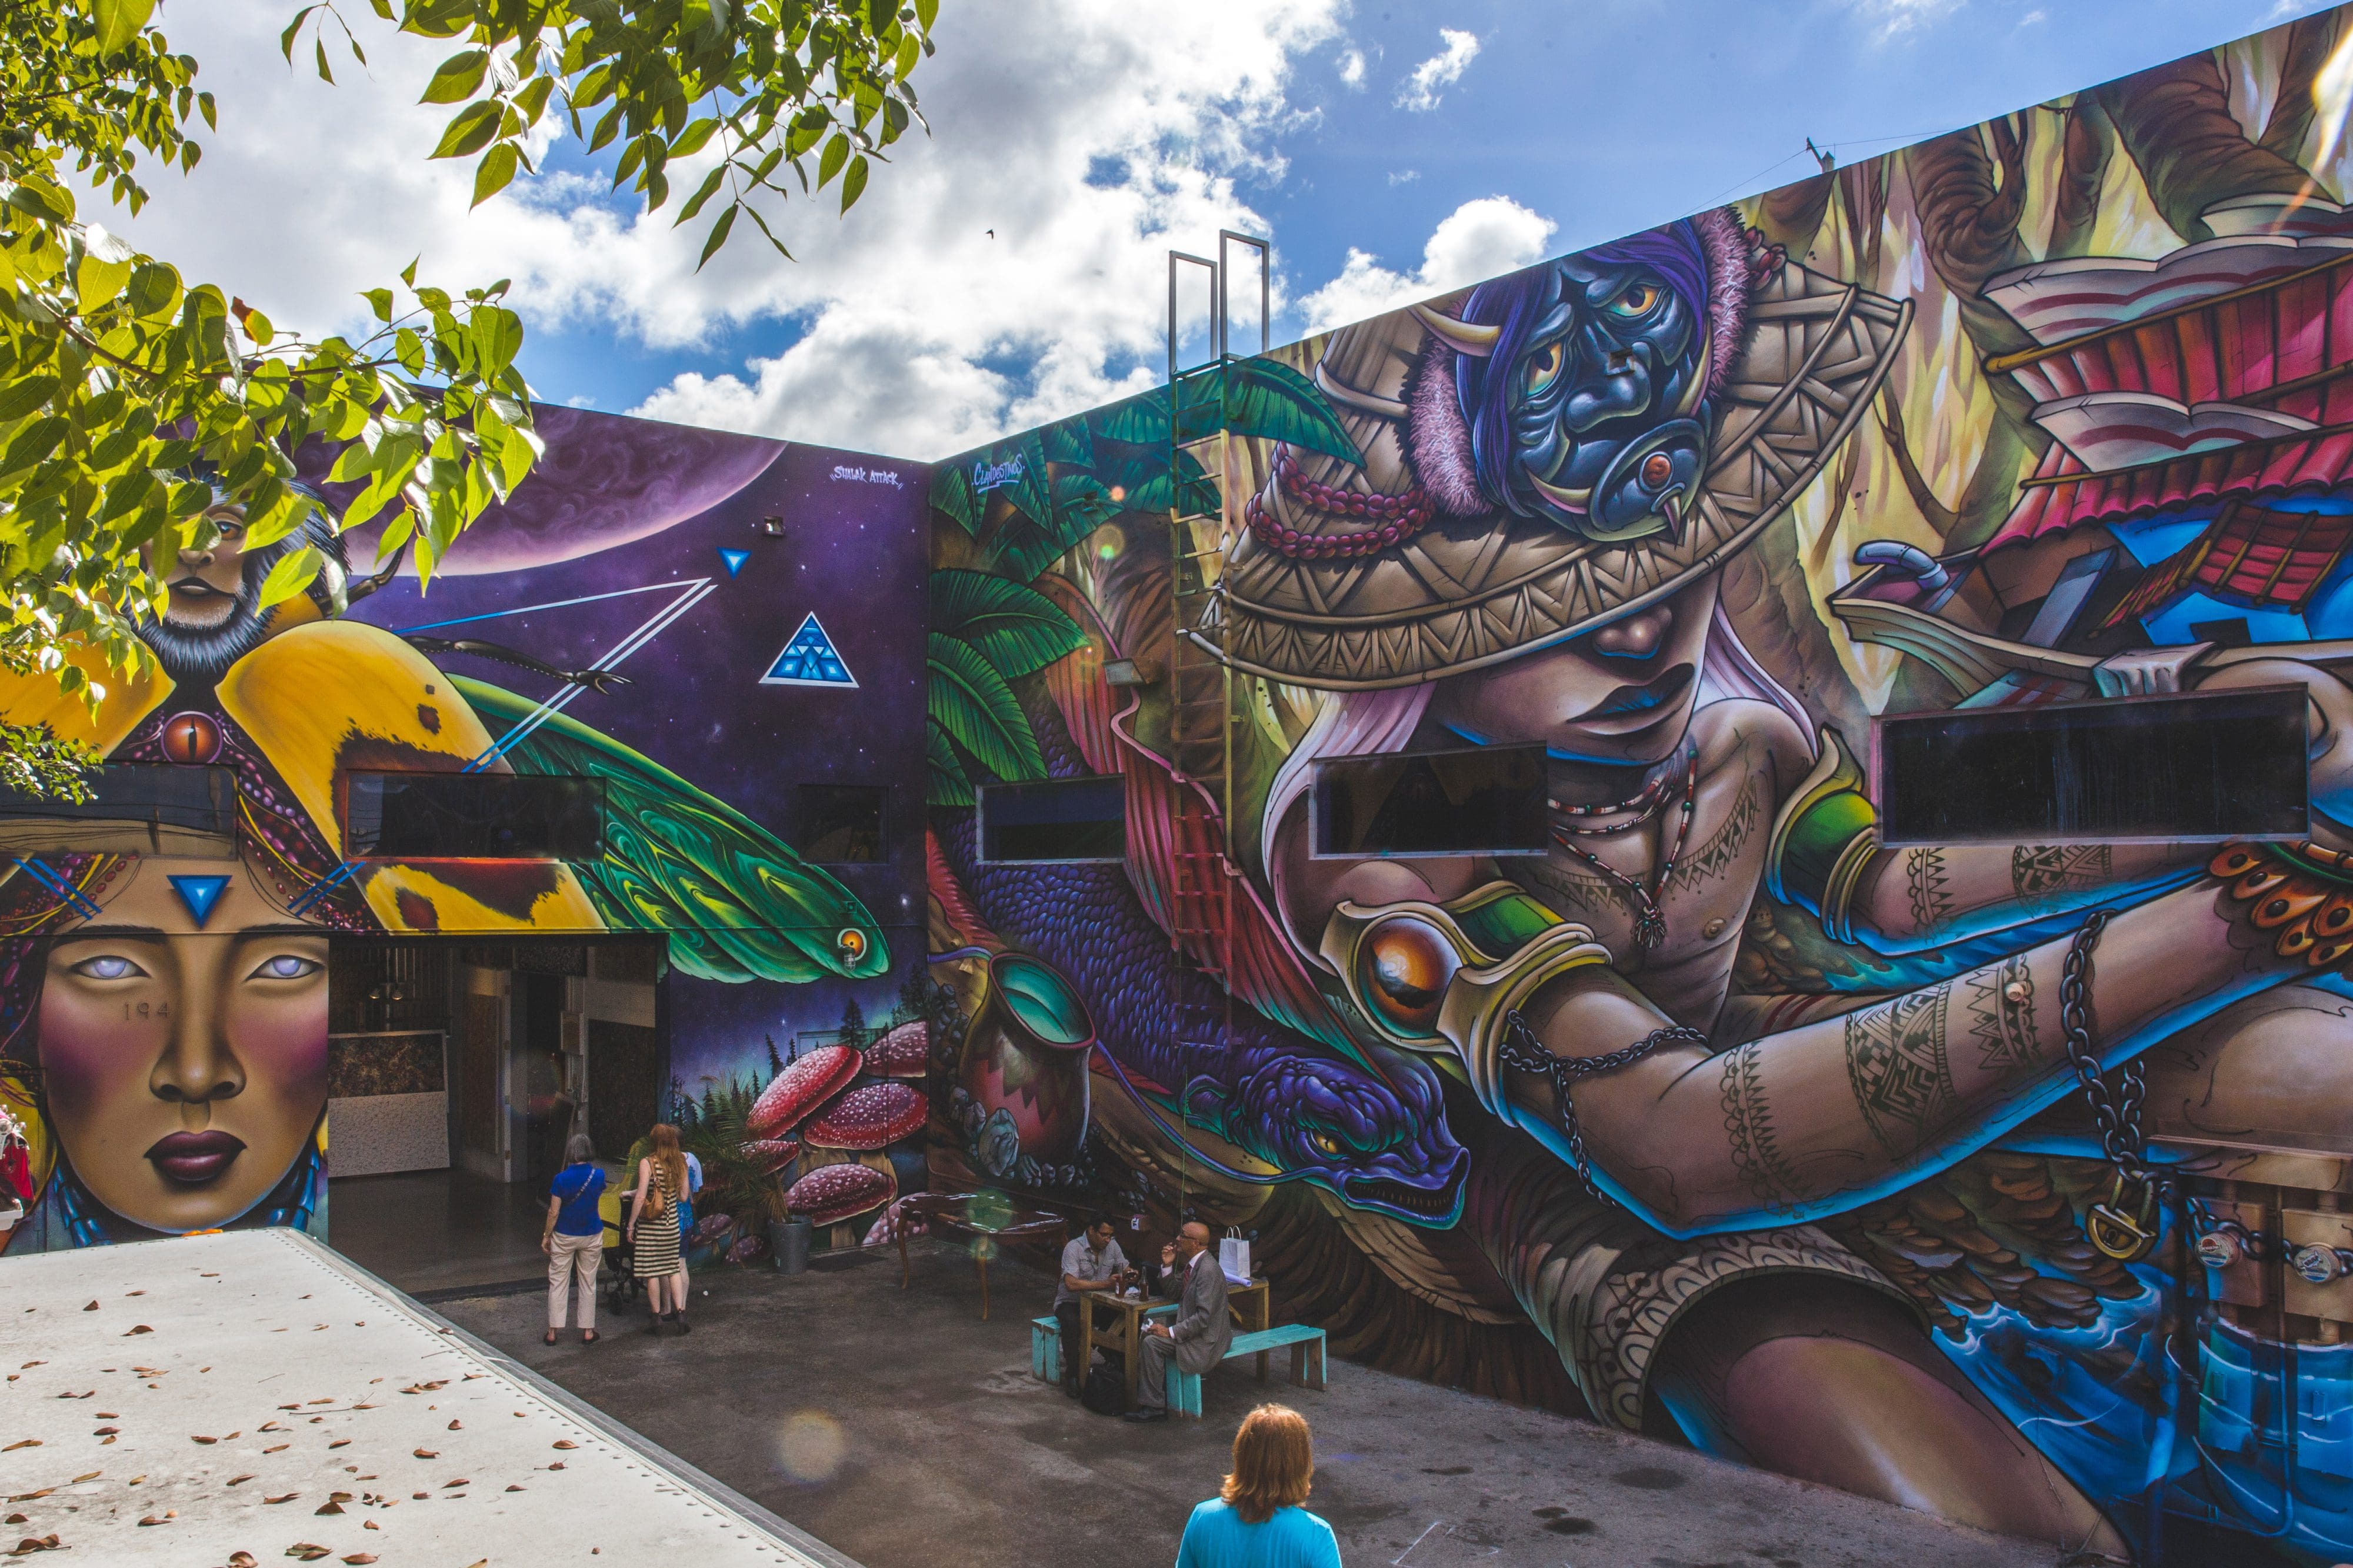 Colourful wall murals at Wynwood